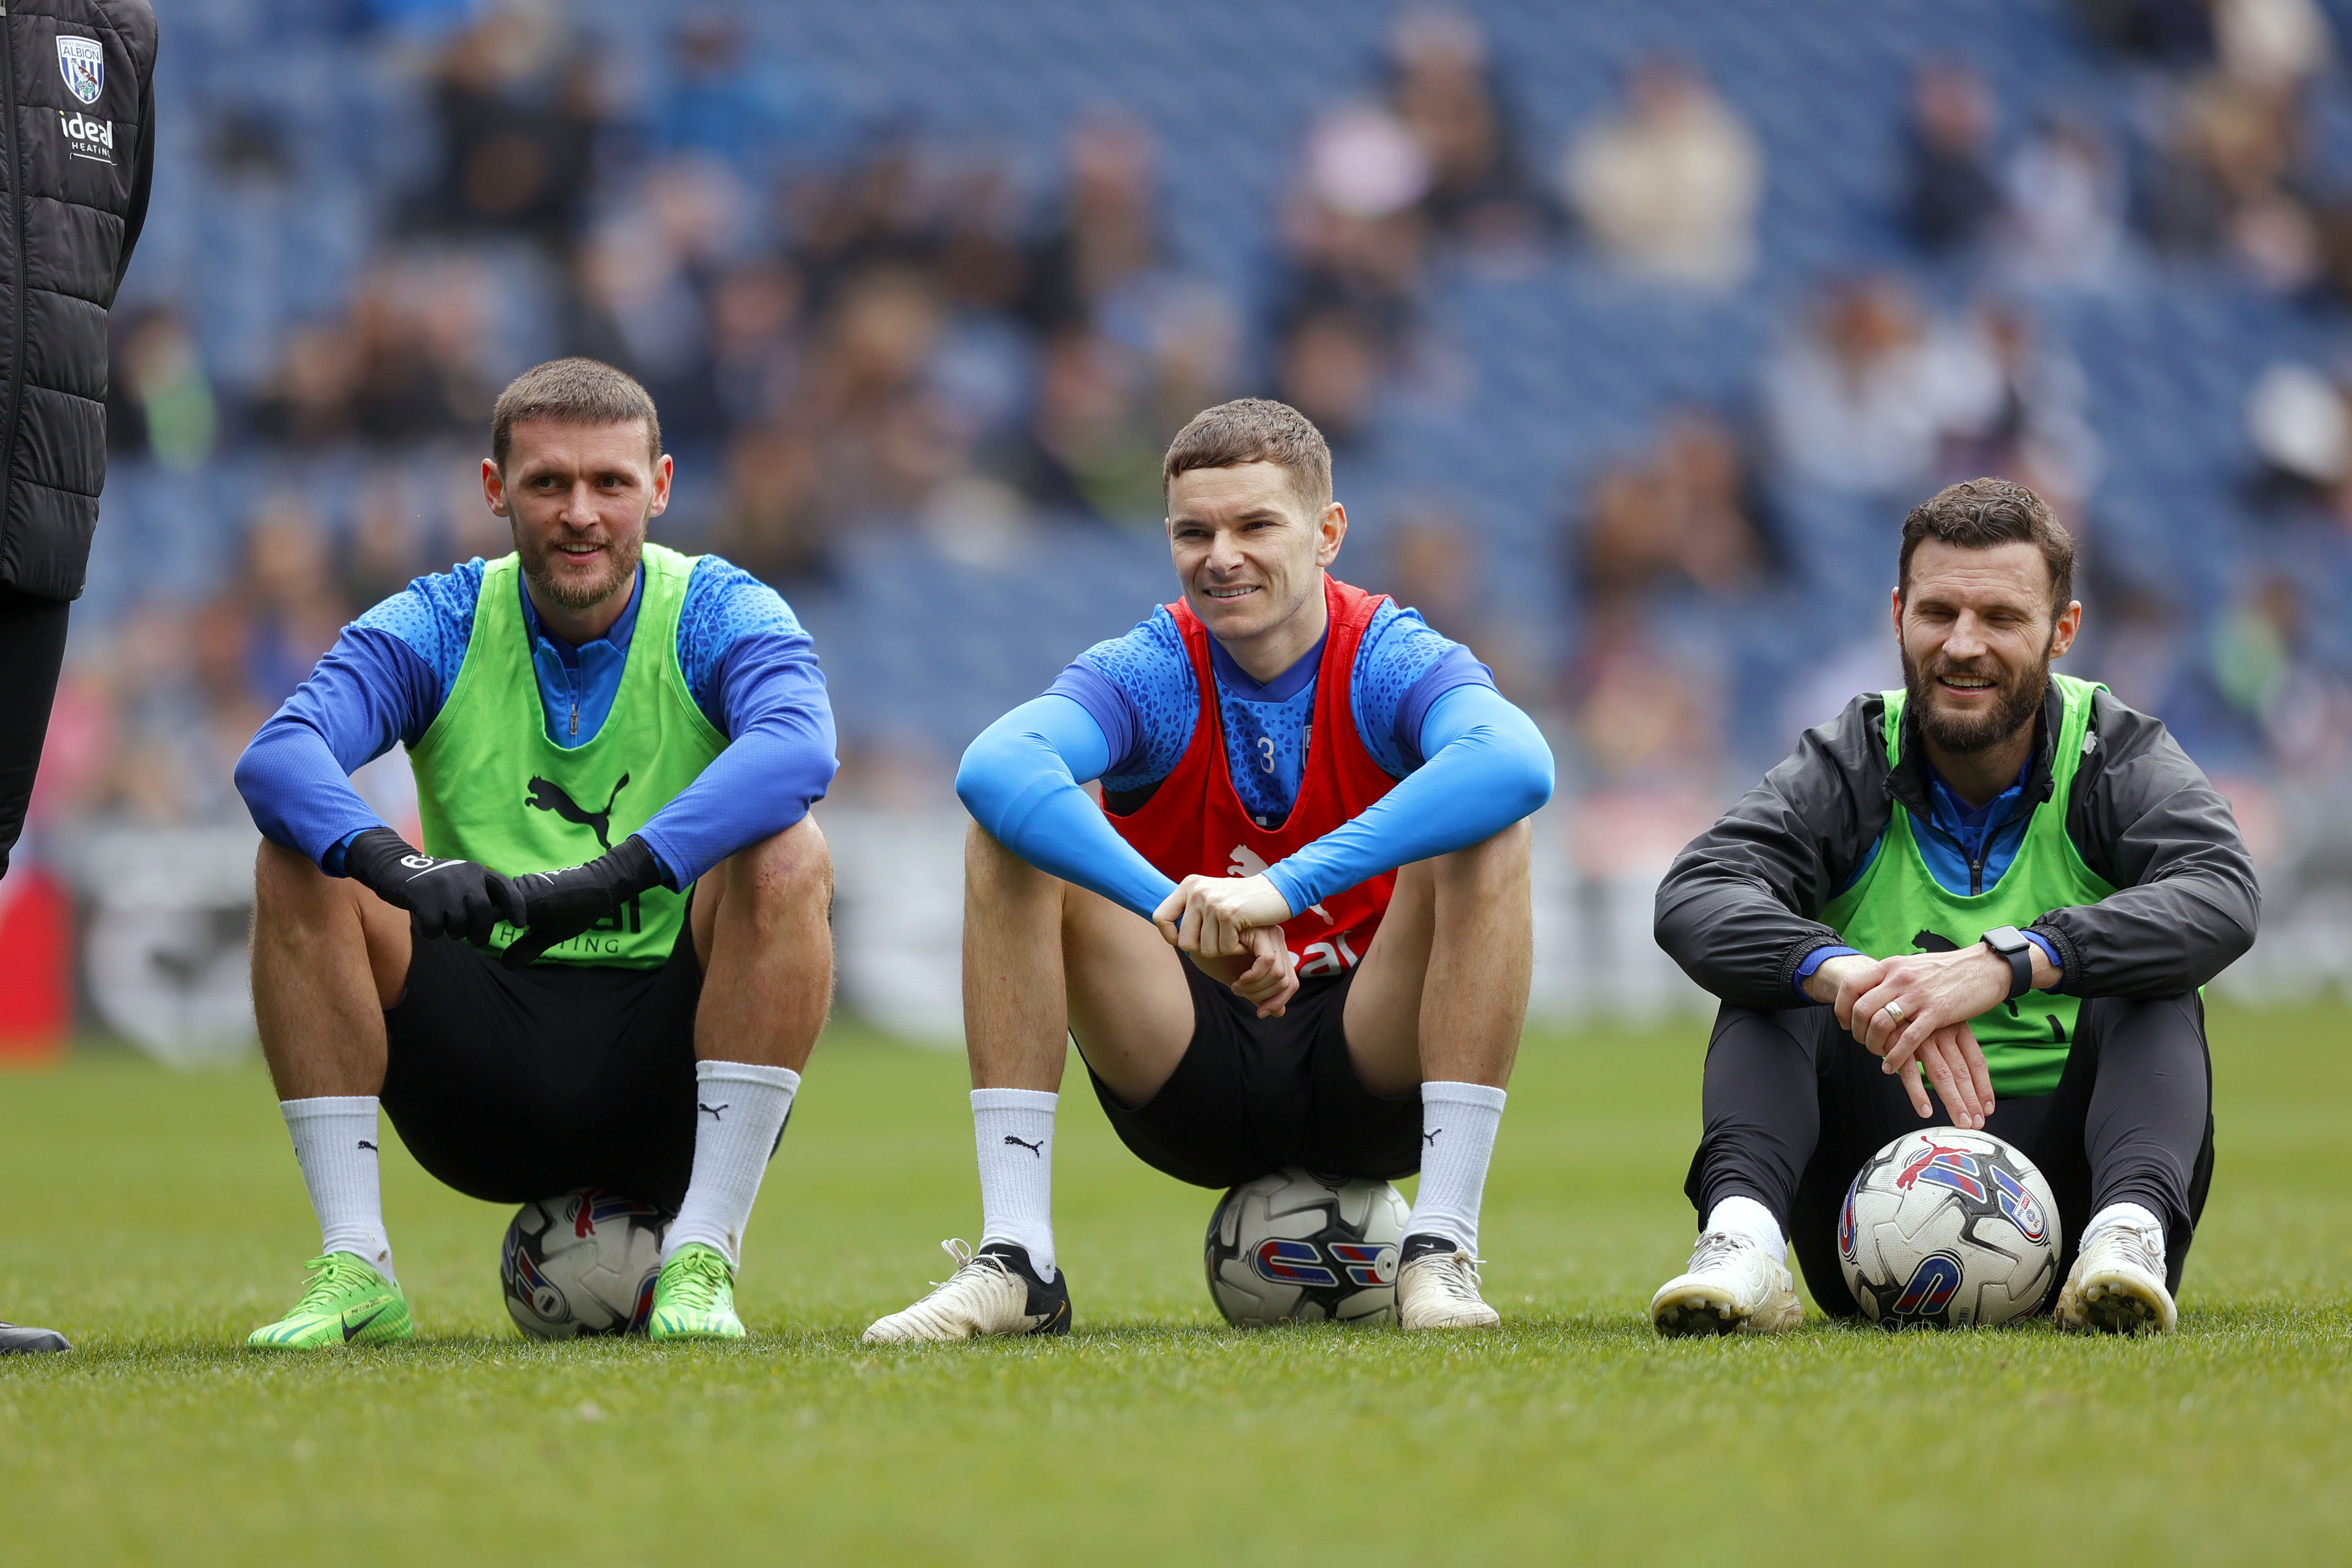 John Swift, Conor Townsend and Erik Pieters sat down smiling while watching training at The Hawthorns